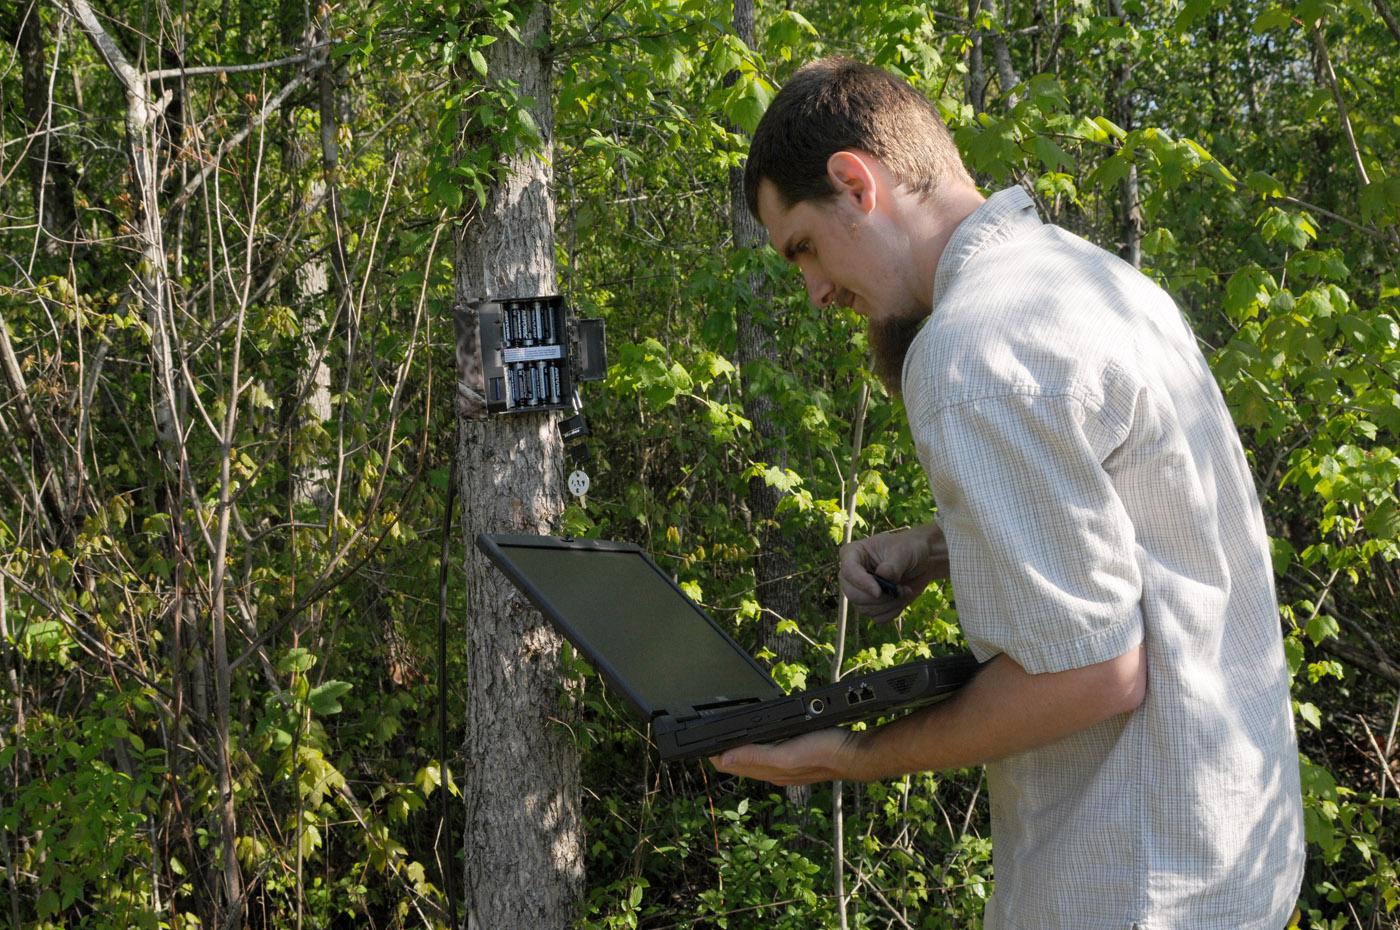 Edward Entsminger, wildlife and fisheries science graduate student, checks trail cameras to monitor wildlife presence and spreads native wildflower seeds. (Photo by Kat Lawrence)